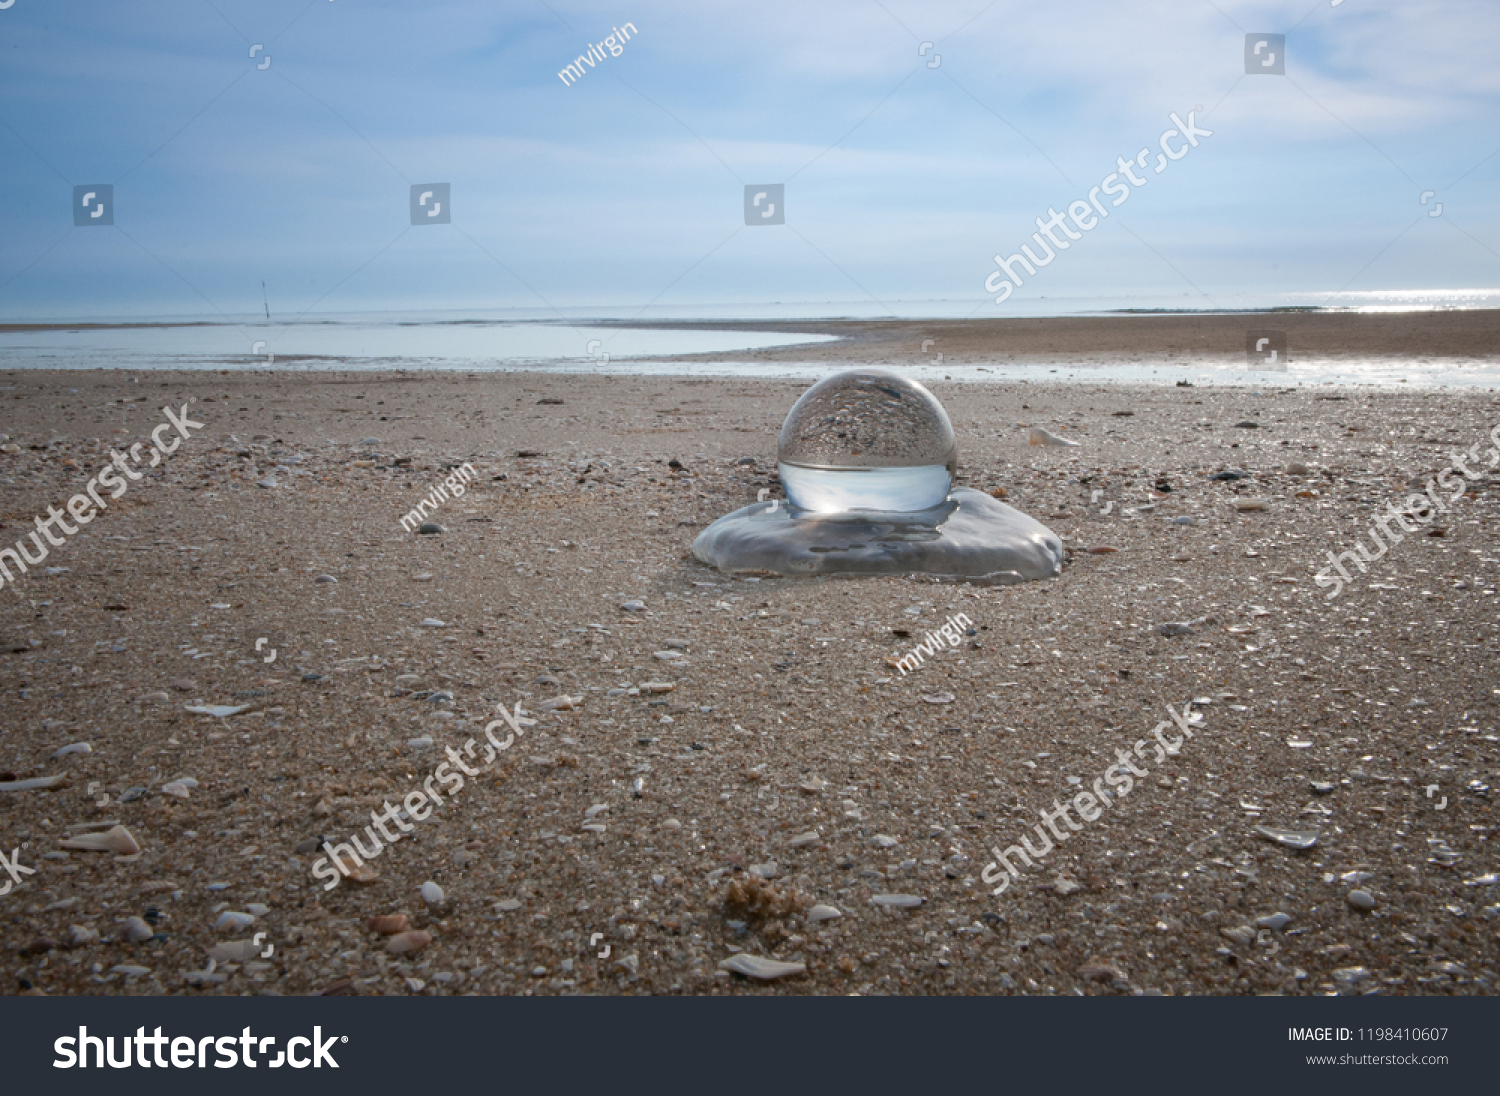 Beautiful Tropical Landscape seen through a Glass Orb. Glass orb by the sea and beach with waves crashing on shore. #1198410607